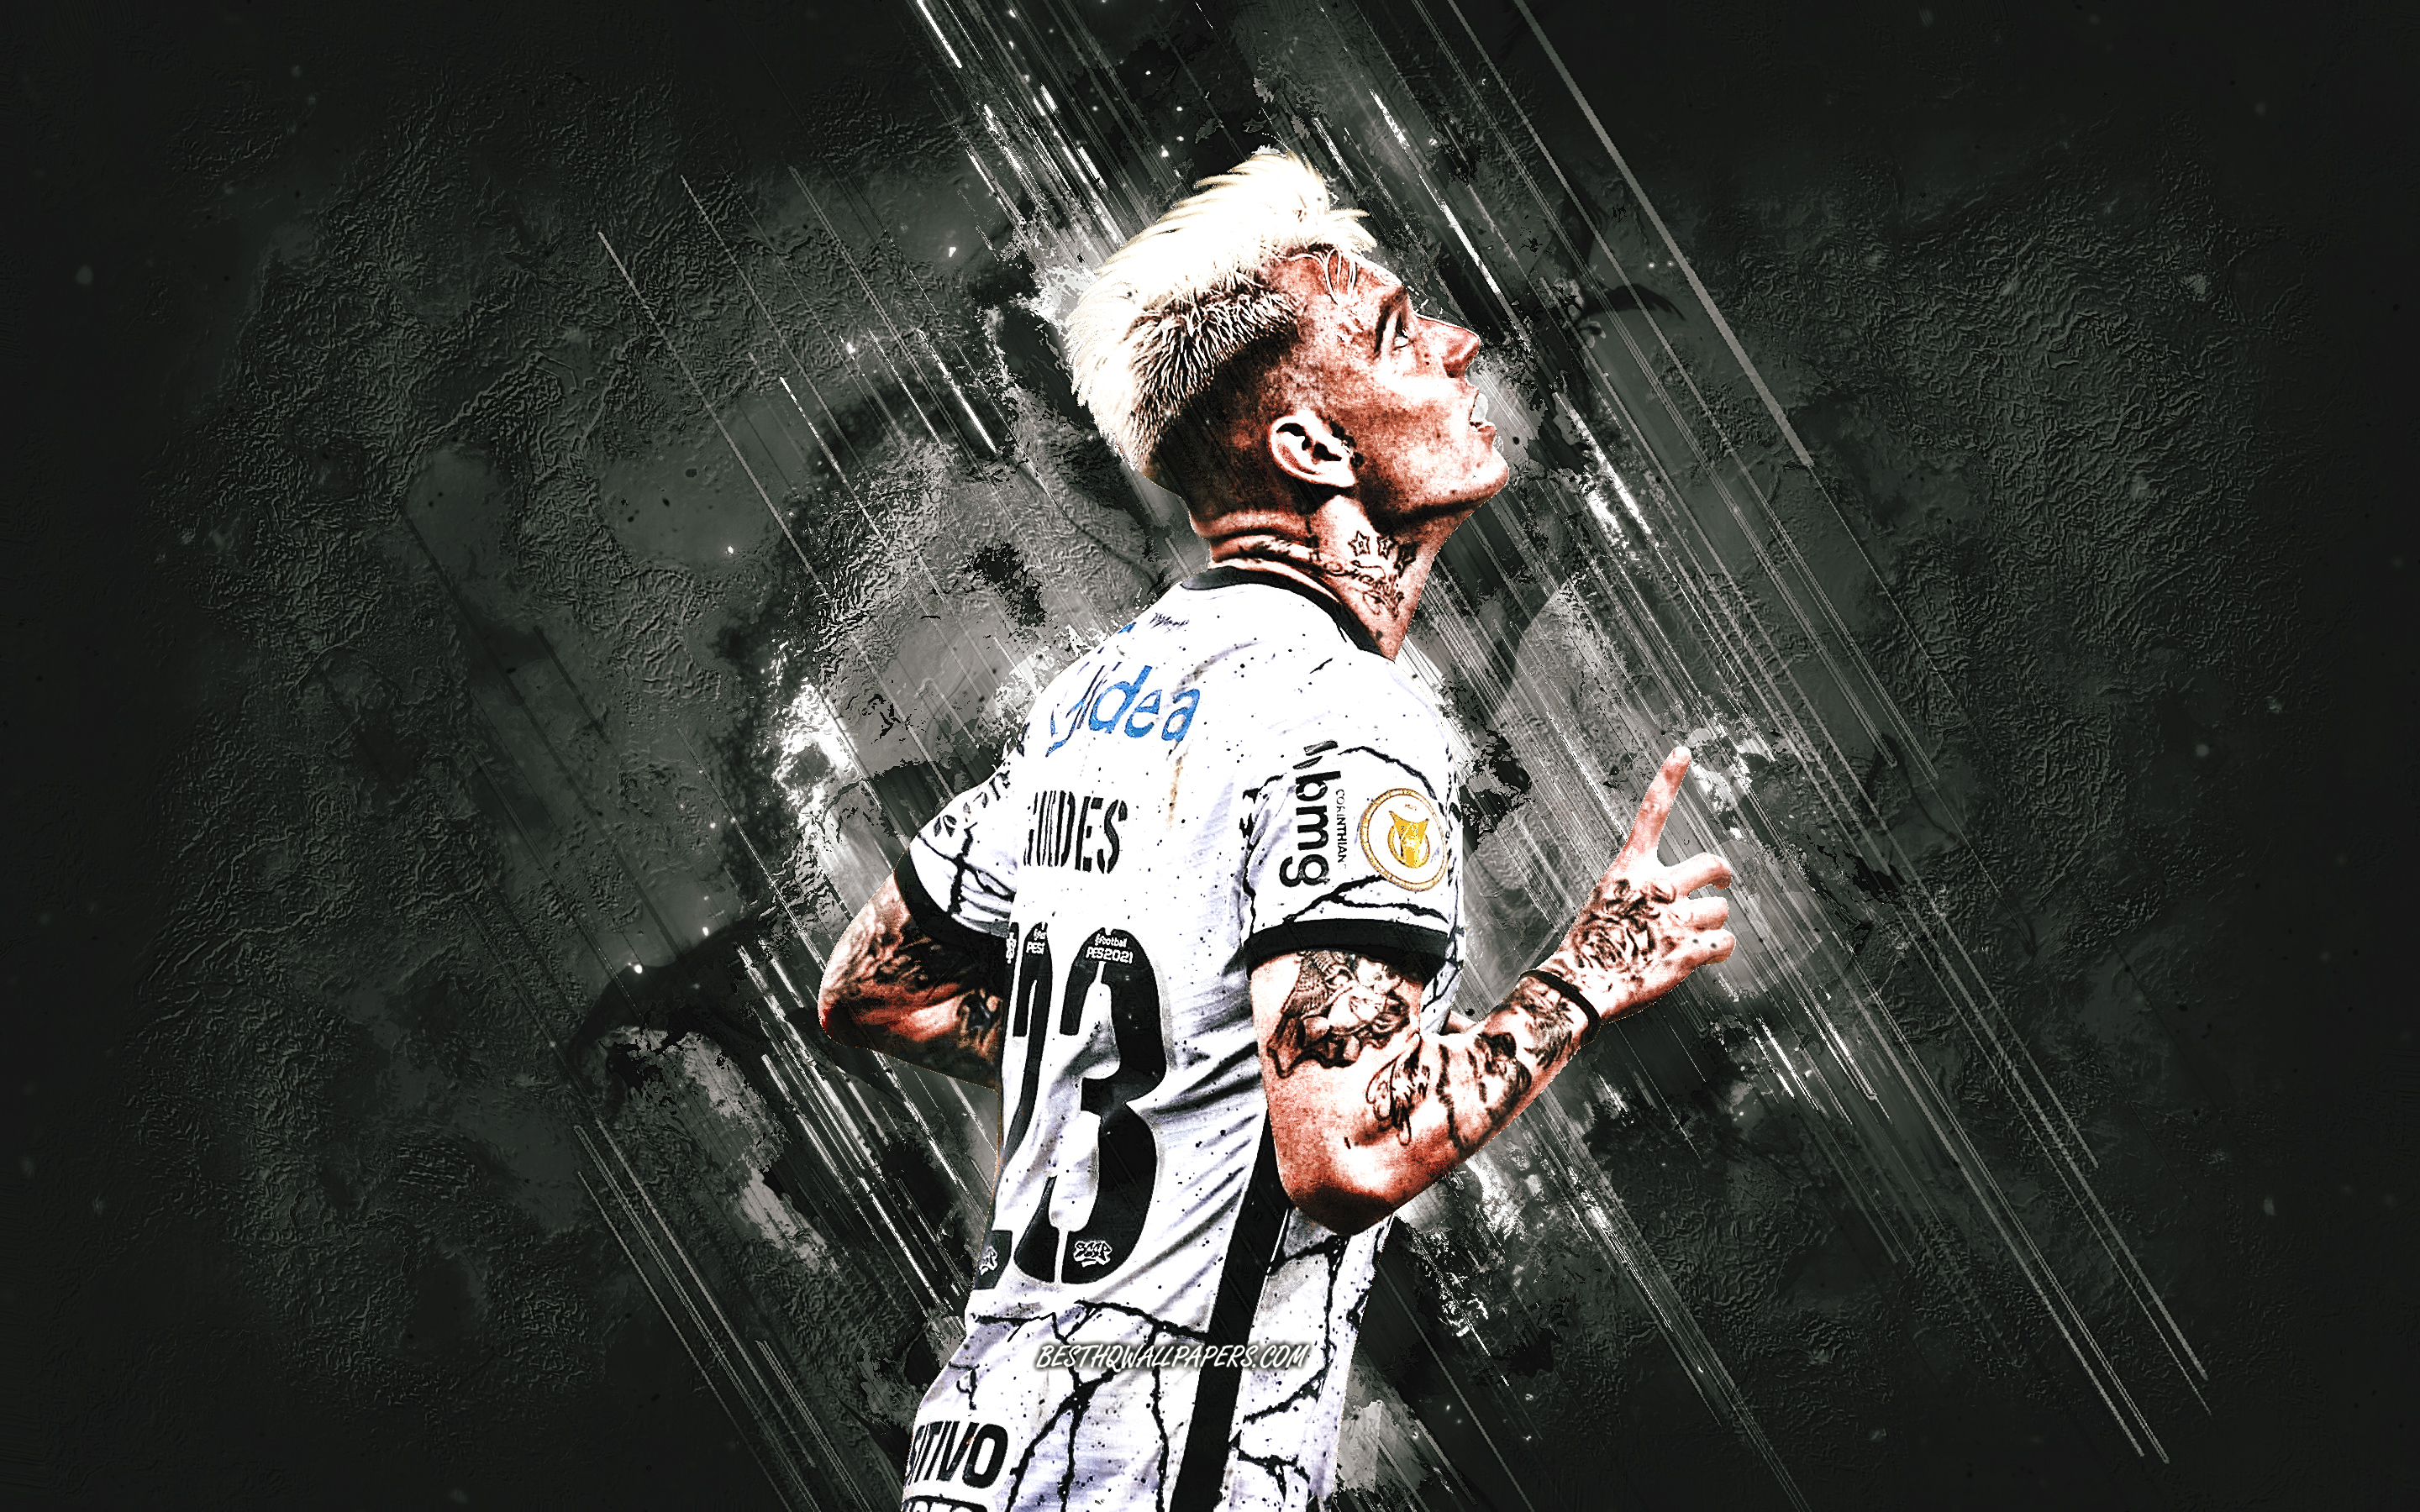 Download wallpaper Roger Guedes, Corinthians, Brazilian footballer, white stone background, soccer, Serie A, Brazil, grunge art for desktop with resolution 2880x1800. High Quality HD picture wallpaper